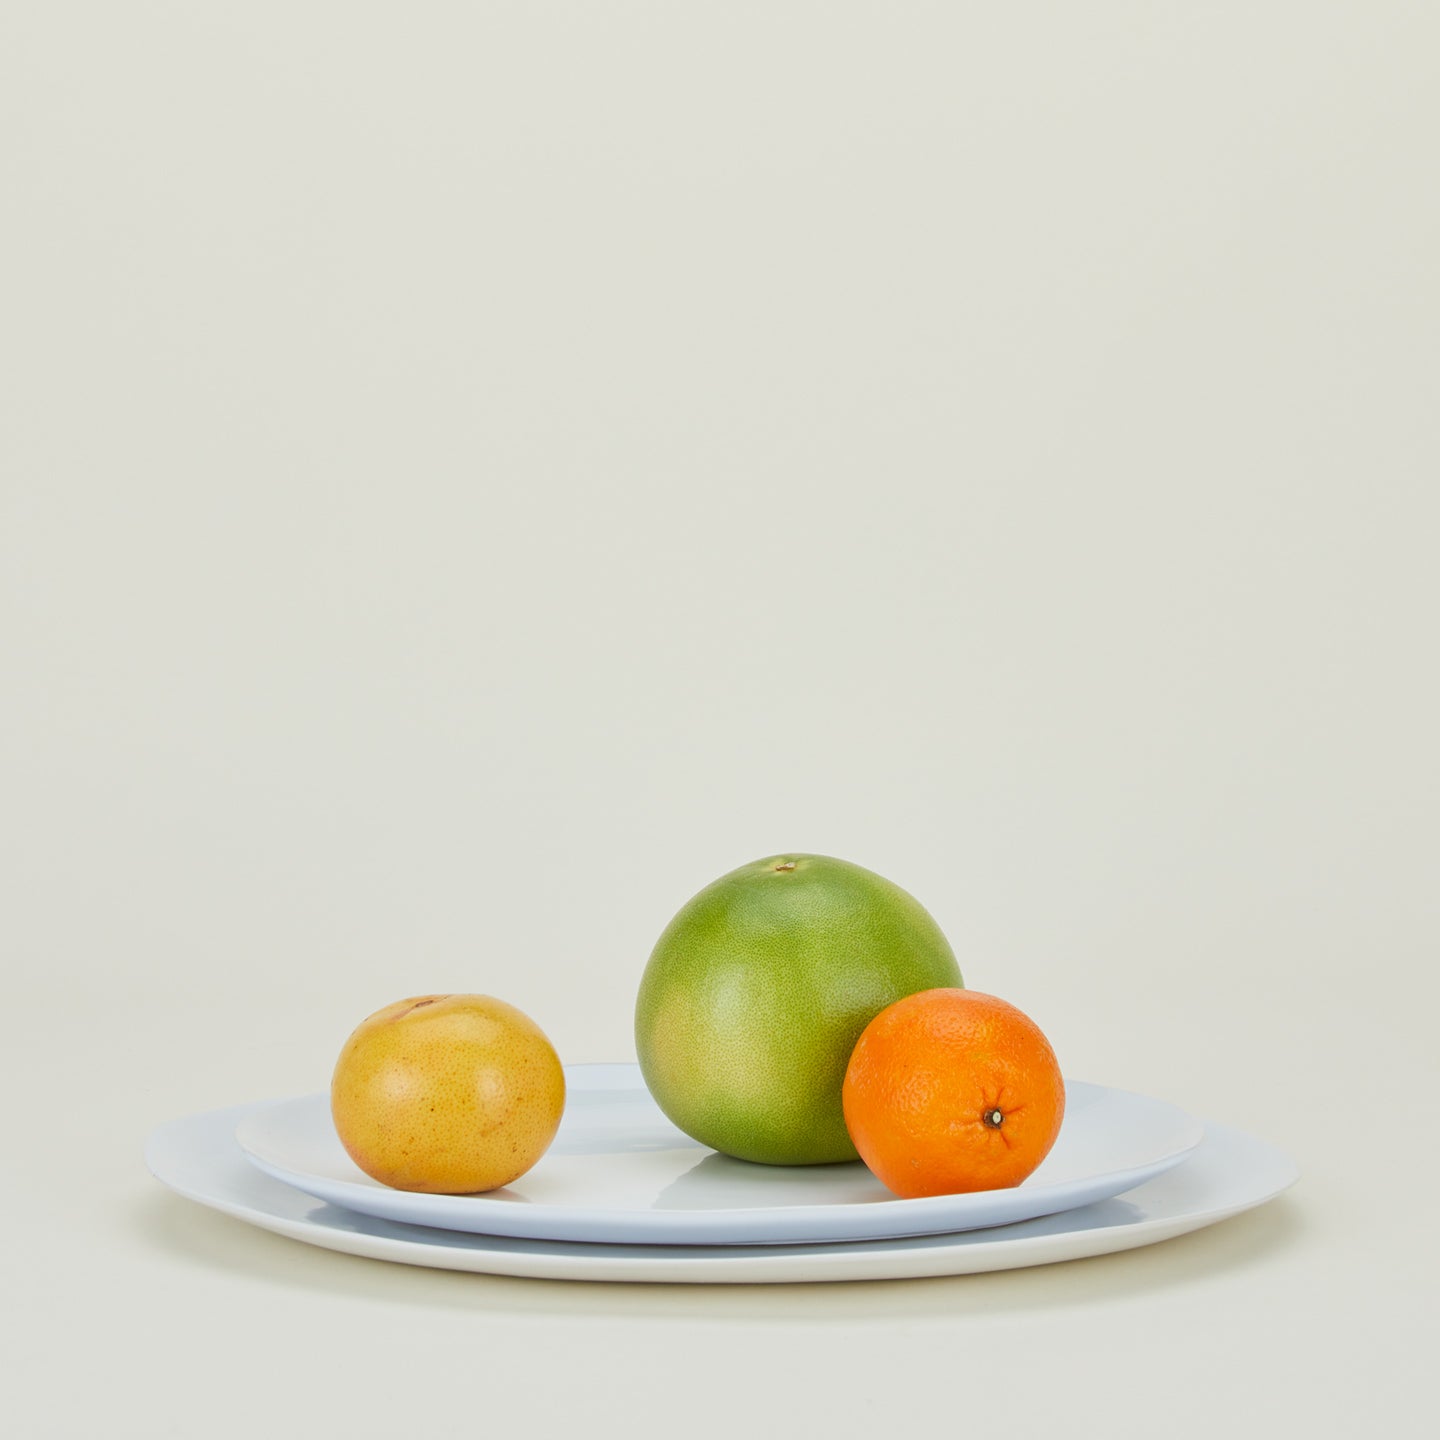 White Strata Serving Platter in two sizes stacked, with citrus fruit.